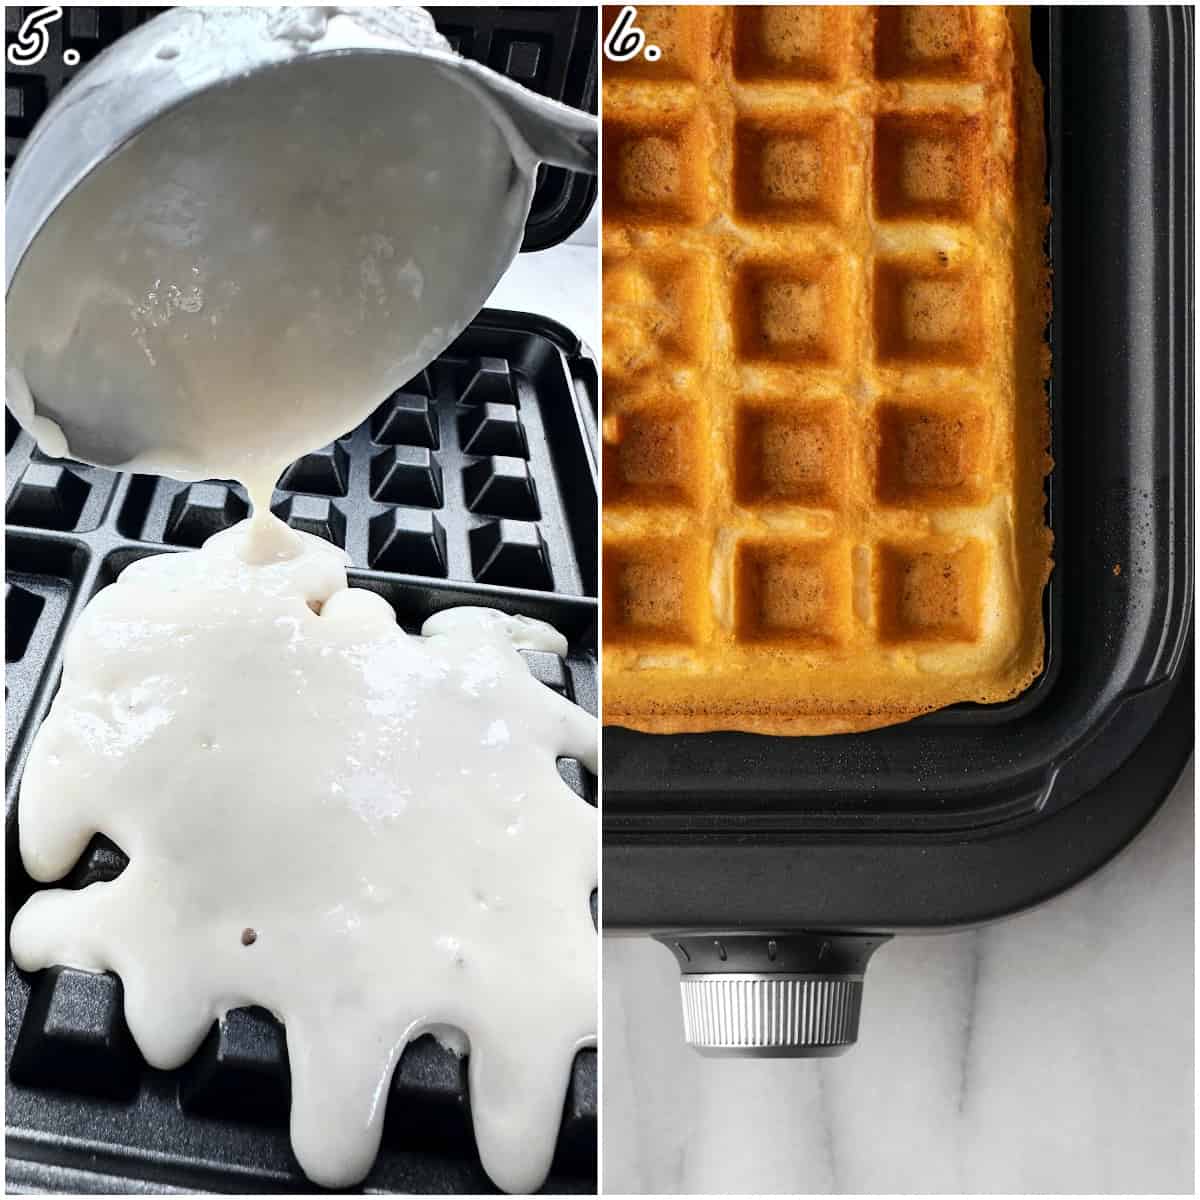 two process photos showing uncooked batter in a waffle iron and one fully cooked one.